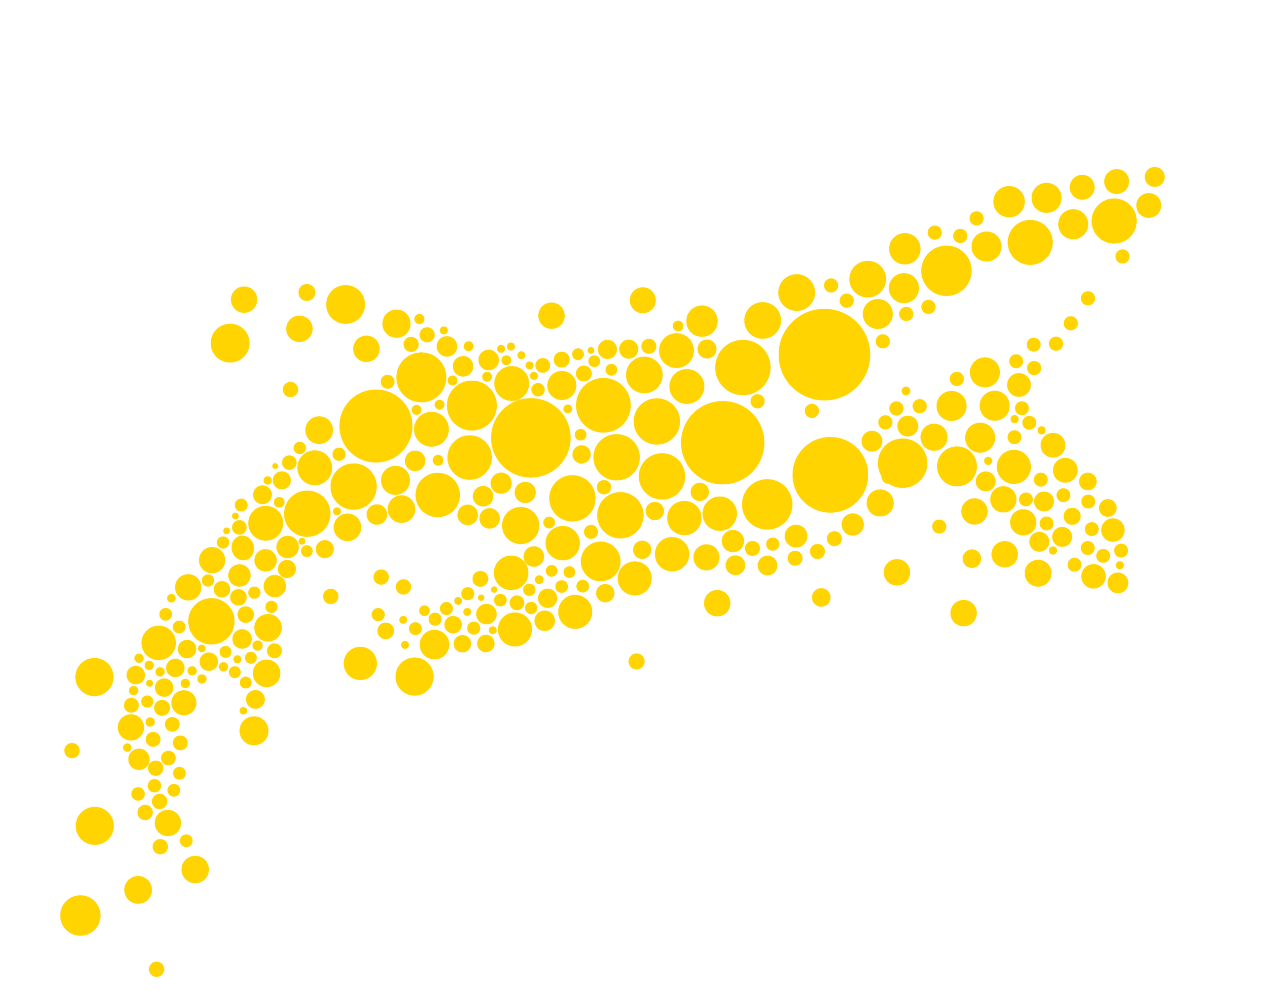 Yellow circles make up the shape of a whale